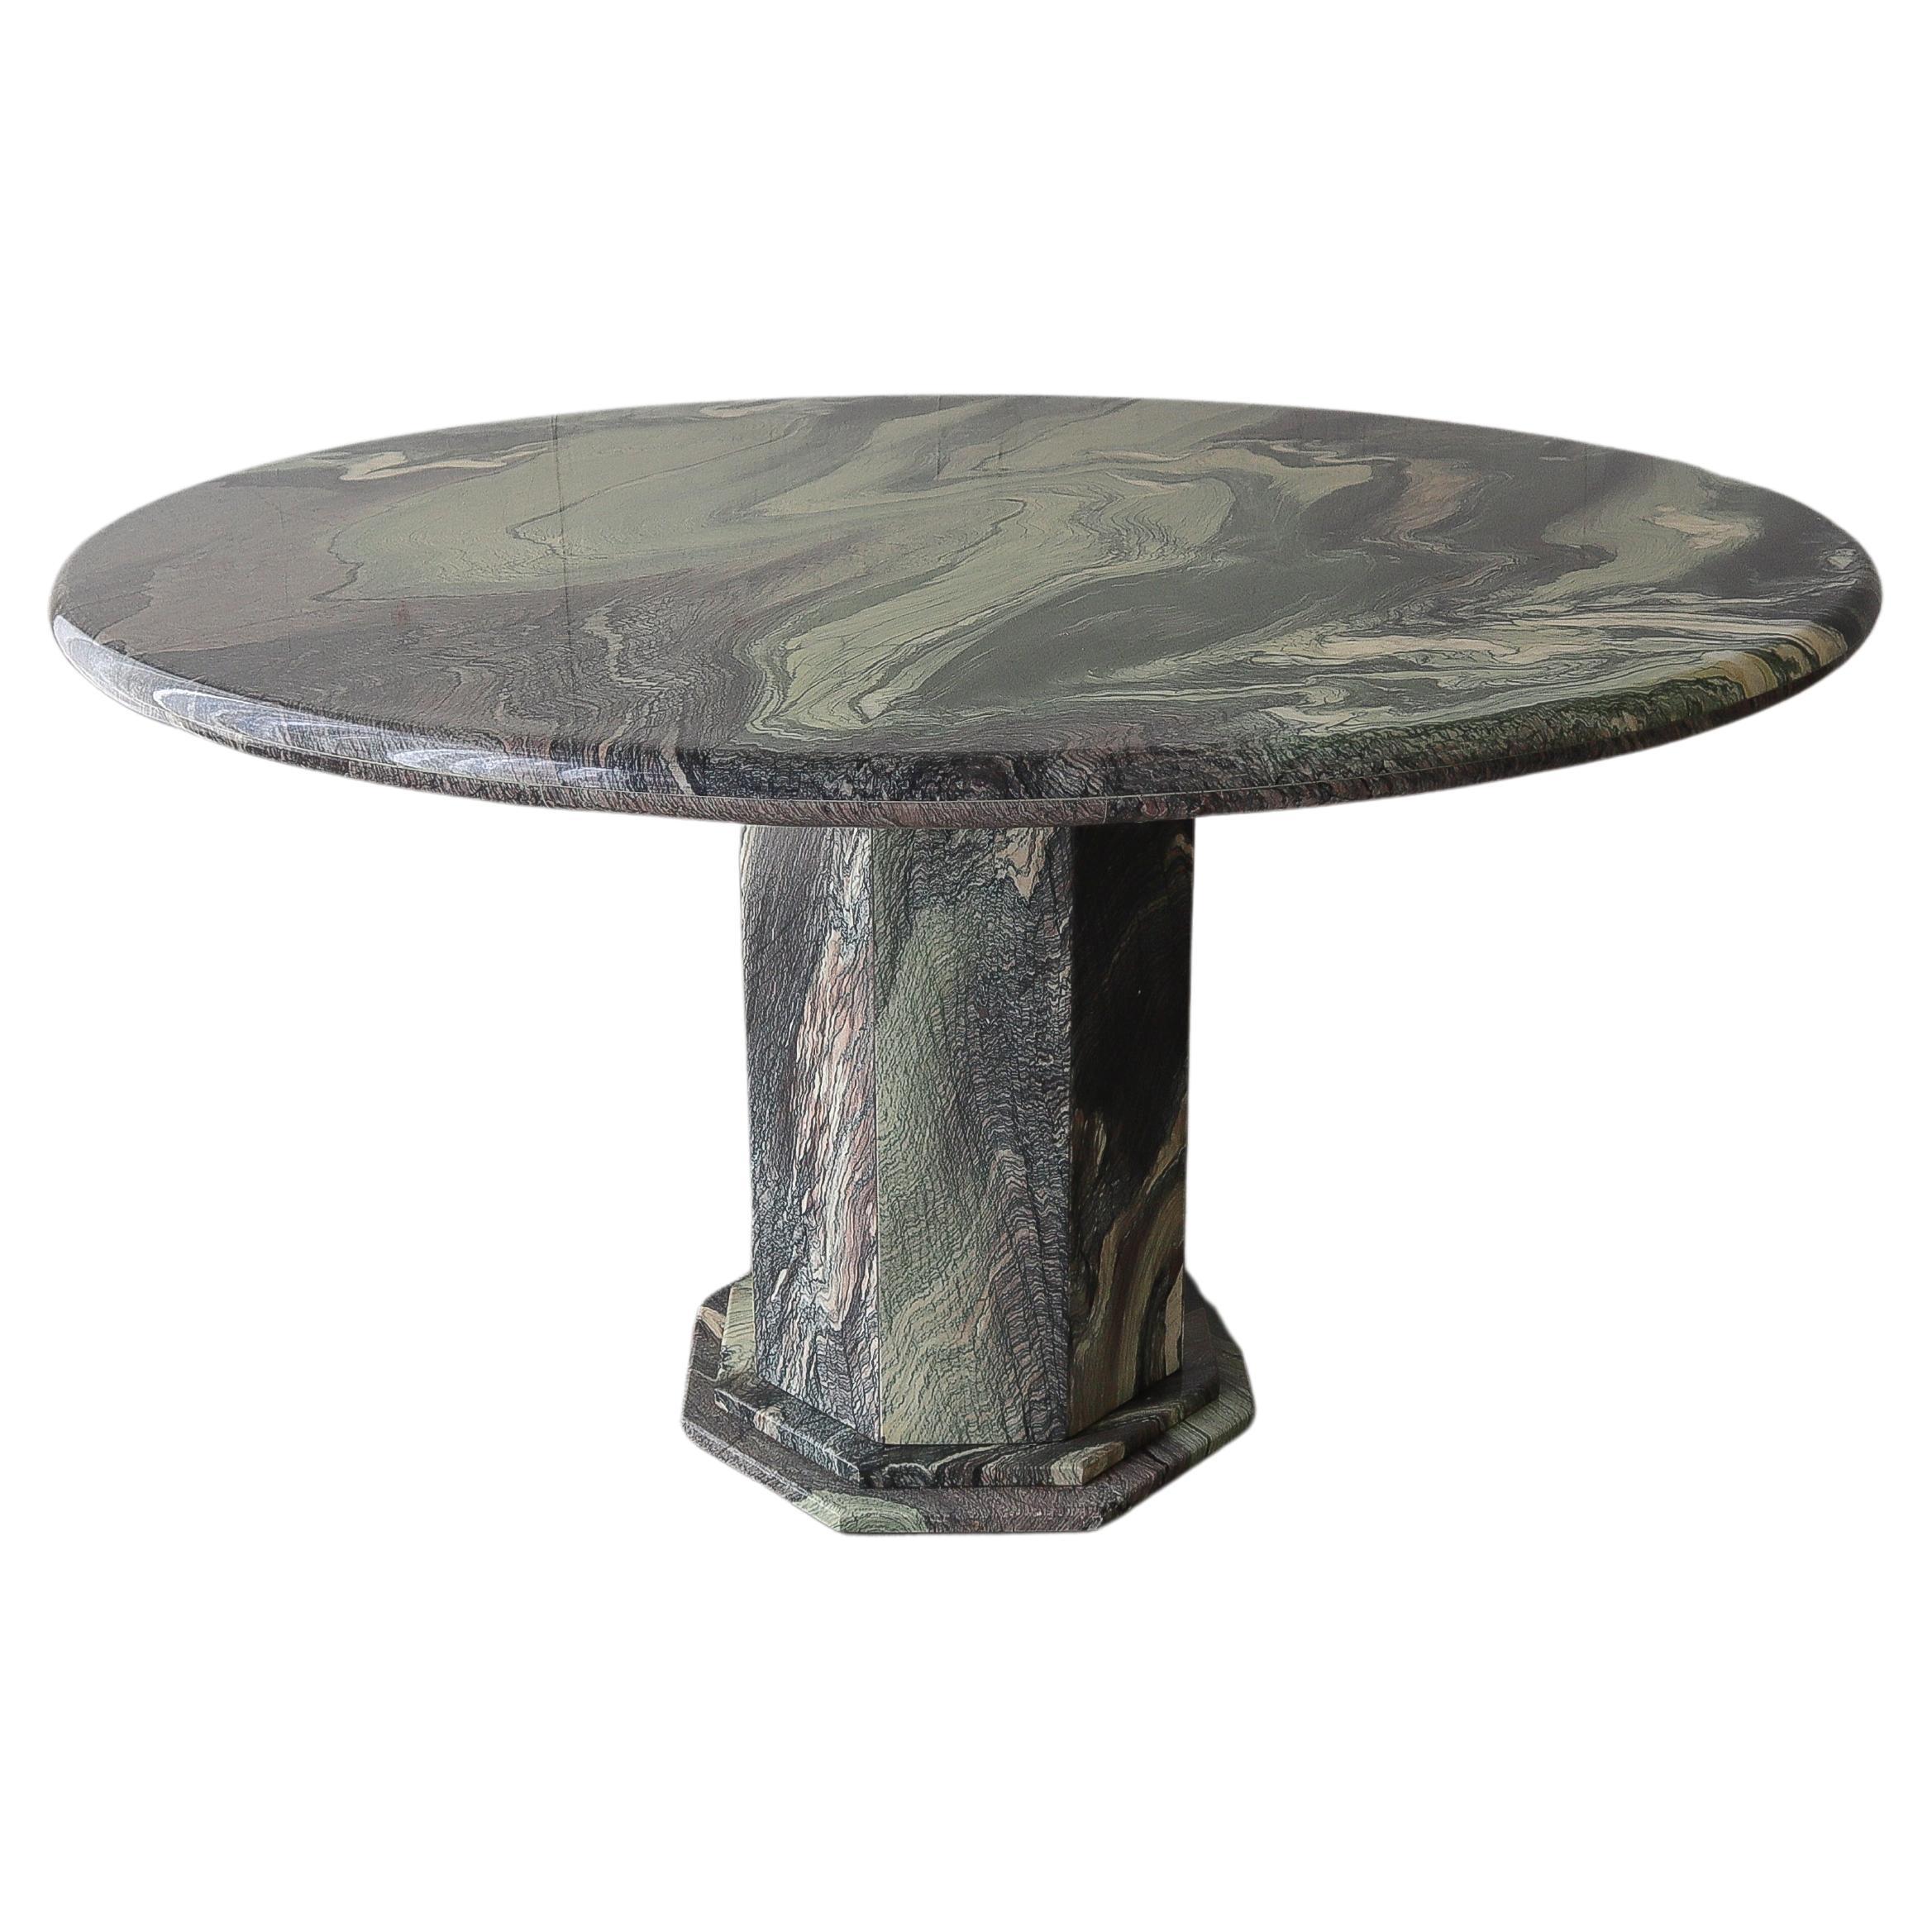 Absolutely stunning Post Modern, Cipollino Ondulato swirled marble dining table.
This table is a great size, just large enough to seat 6 but small enough to not look awkward as a 4 seater either.  The rounded edges of the top set this piece off